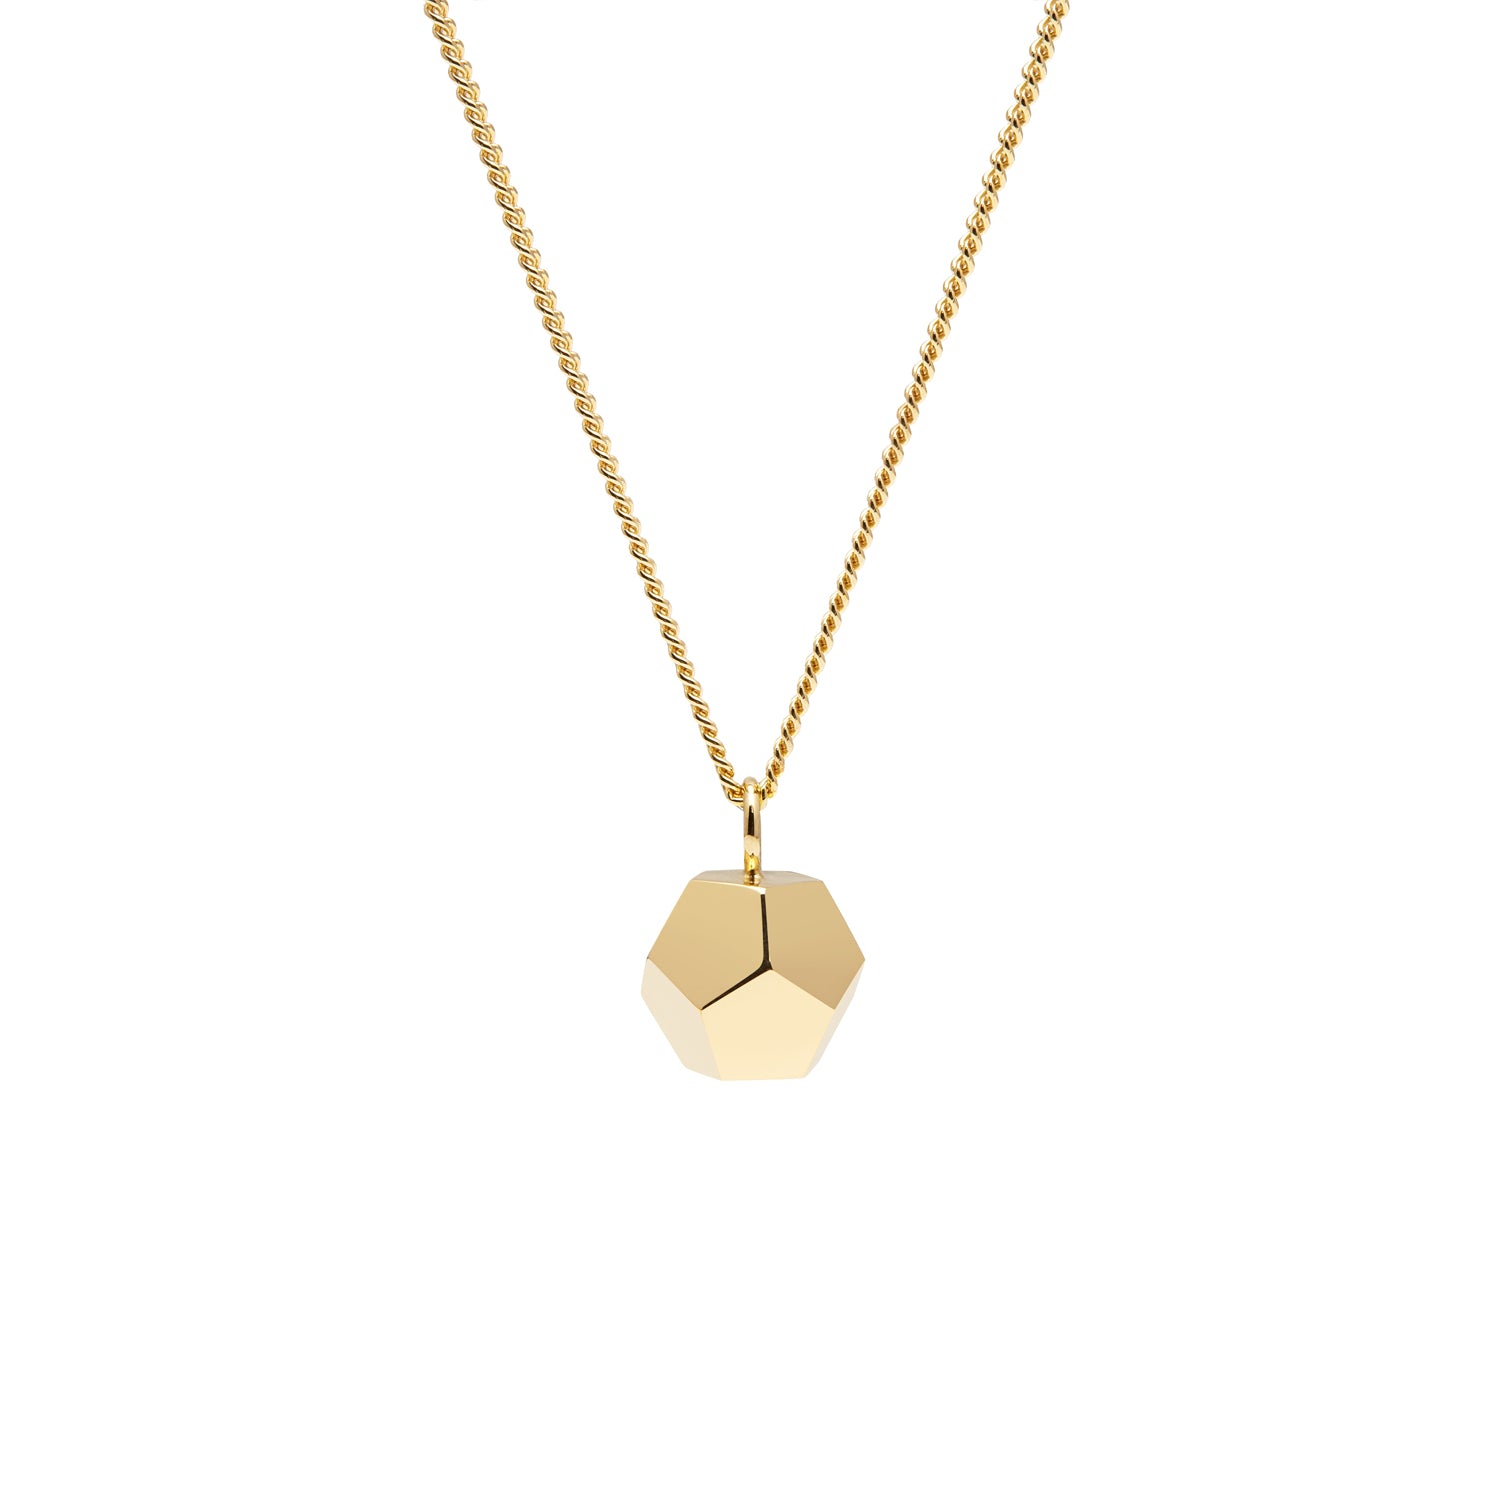 Dodecahedron Pendant Necklace - Gold